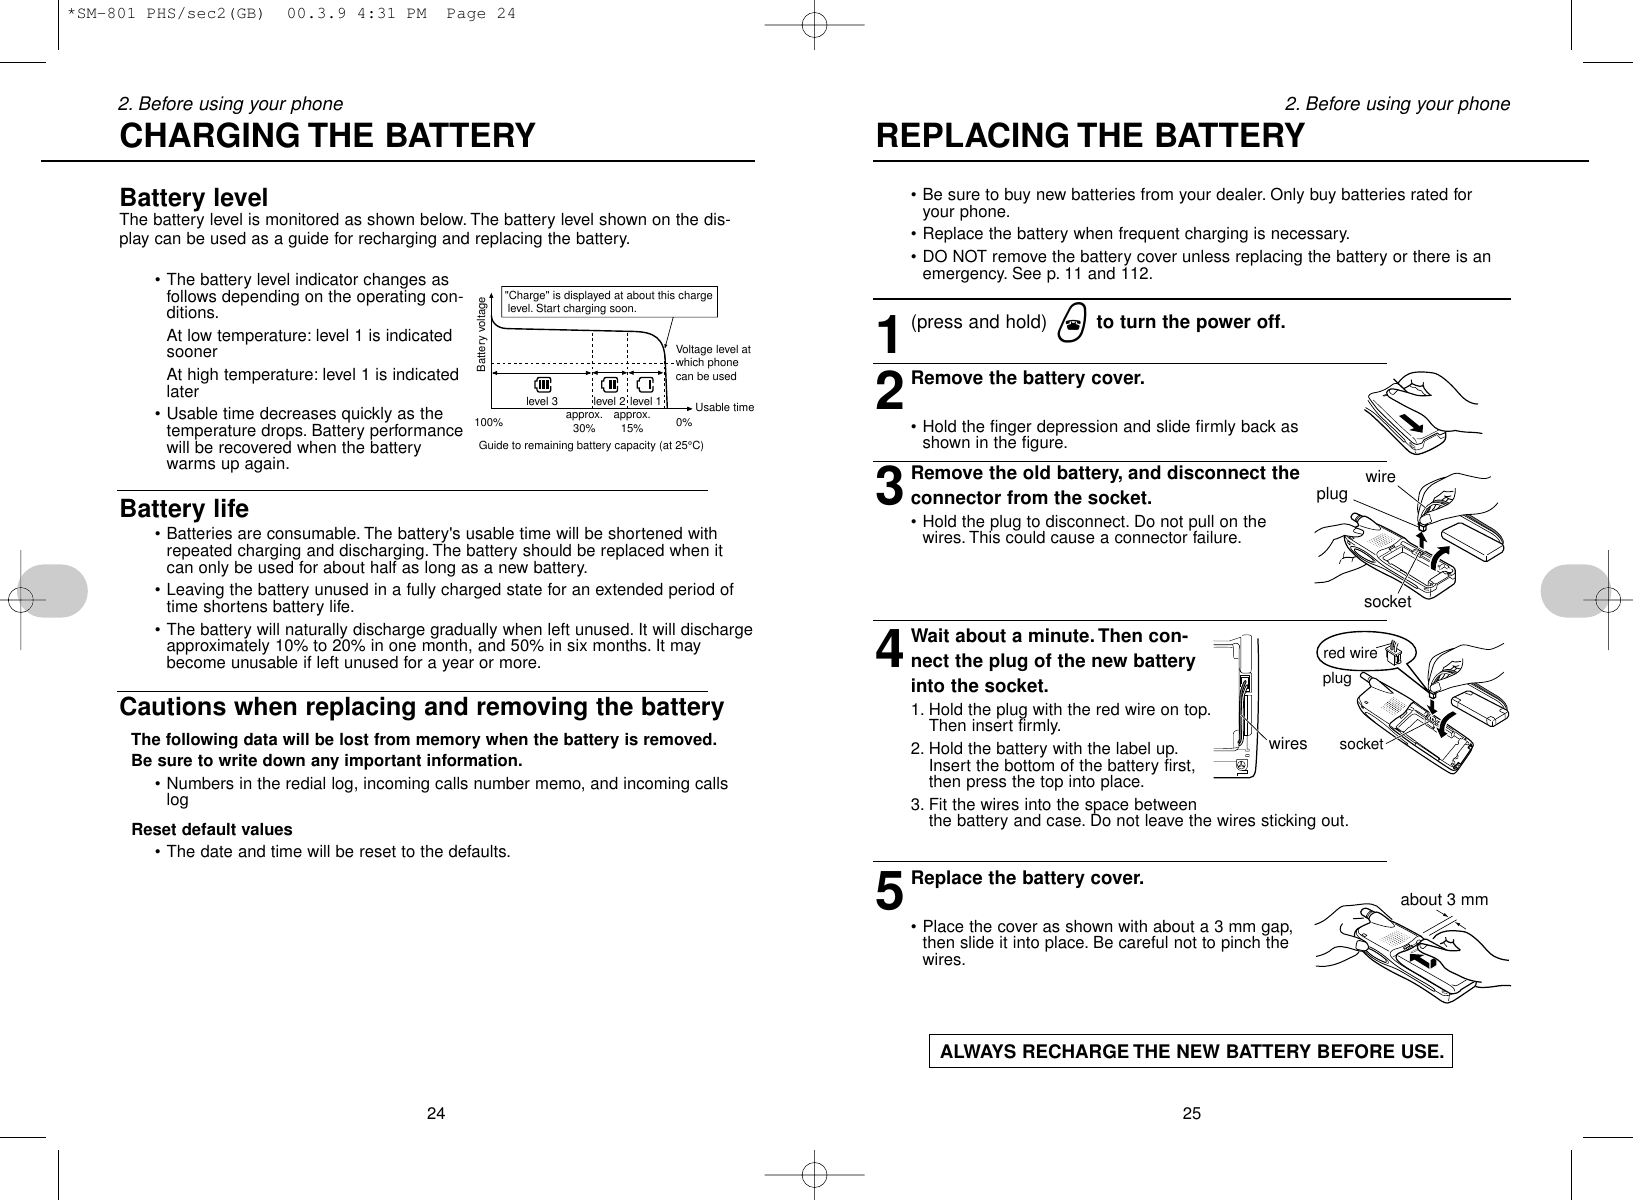 • Be sure to buy new batteries from your dealer. Only buy batteries rated foryour phone.• Replace the battery when frequent charging is necessary.• DO NOT remove the battery cover unless replacing the battery or there is anemergency. See p. 11 and 112.1(press and hold) wto turn the power off.2Remove the battery cover.• Hold the finger depression and slide firmly back asshown in the figure.3Remove the old battery, and disconnect theconnector from the socket.• Hold the plug to disconnect. Do not pull on thewires. This could cause a connector failure.4Wait about a minute. Then con-nect the plug of the new batteryinto the socket.1. Hold the plug with the red wire on top.Then insert firmly.2. Hold the battery with the label up.Insert the bottom of the battery first,then press the top into place.3. Fit the wires into the space betweenthe battery and case. Do not leave the wires sticking out.5Replace the battery cover.• Place the cover as shown with about a 3 mm gap,then slide it into place. Be careful not to pinch thewires.ALWAYS RECHARGE THE NEW BATTERY BEFORE USE.252. Before using your phoneBattery levelThe battery level is monitored as shown below. The battery level shown on the dis-play can be used as a guide for recharging and replacing the battery.• The battery level indicator changes asfollows depending on the operating con-ditions.At low temperature: level 1 is indicatedsoonerAt high temperature: level 1 is indicatedlater• Usable time decreases quickly as thetemperature drops. Battery performancewill be recovered when the batterywarms up again.Battery life• Batteries are consumable. The battery&apos;s usable time will be shortened withrepeated charging and discharging. The battery should be replaced when itcan only be used for about half as long as a new battery.• Leaving the battery unused in a fully charged state for an extended period oftime shortens battery life.• The battery will naturally discharge gradually when left unused. It will dischargeapproximately 10% to 20% in one month, and 50% in six months. It maybecome unusable if left unused for a year or more.Cautions when replacing and removing the batteryThe following data will be lost from memory when the battery is removed.Be sure to write down any important information.• Numbers in the redial log, incoming calls number memo, and incoming callslogReset default values • The date and time will be reset to the defaults.242. Before using your phone REPLACING THE BATTERYCHARGING THE BATTERYGuide to remaining battery capacity (at 25°C)level 3 level 2 level 1approx.30% approx.15% 0%100%Battery voltage&quot;Charge&quot; is displayed at about this charge level. Start charging soon.Voltage level at which phone can be usedUsable timeplug wiresocketred wireplugsocketwiresabout 3 mm*SM-801 PHS/sec2(GB)  00.3.9 4:31 PM  Page 24